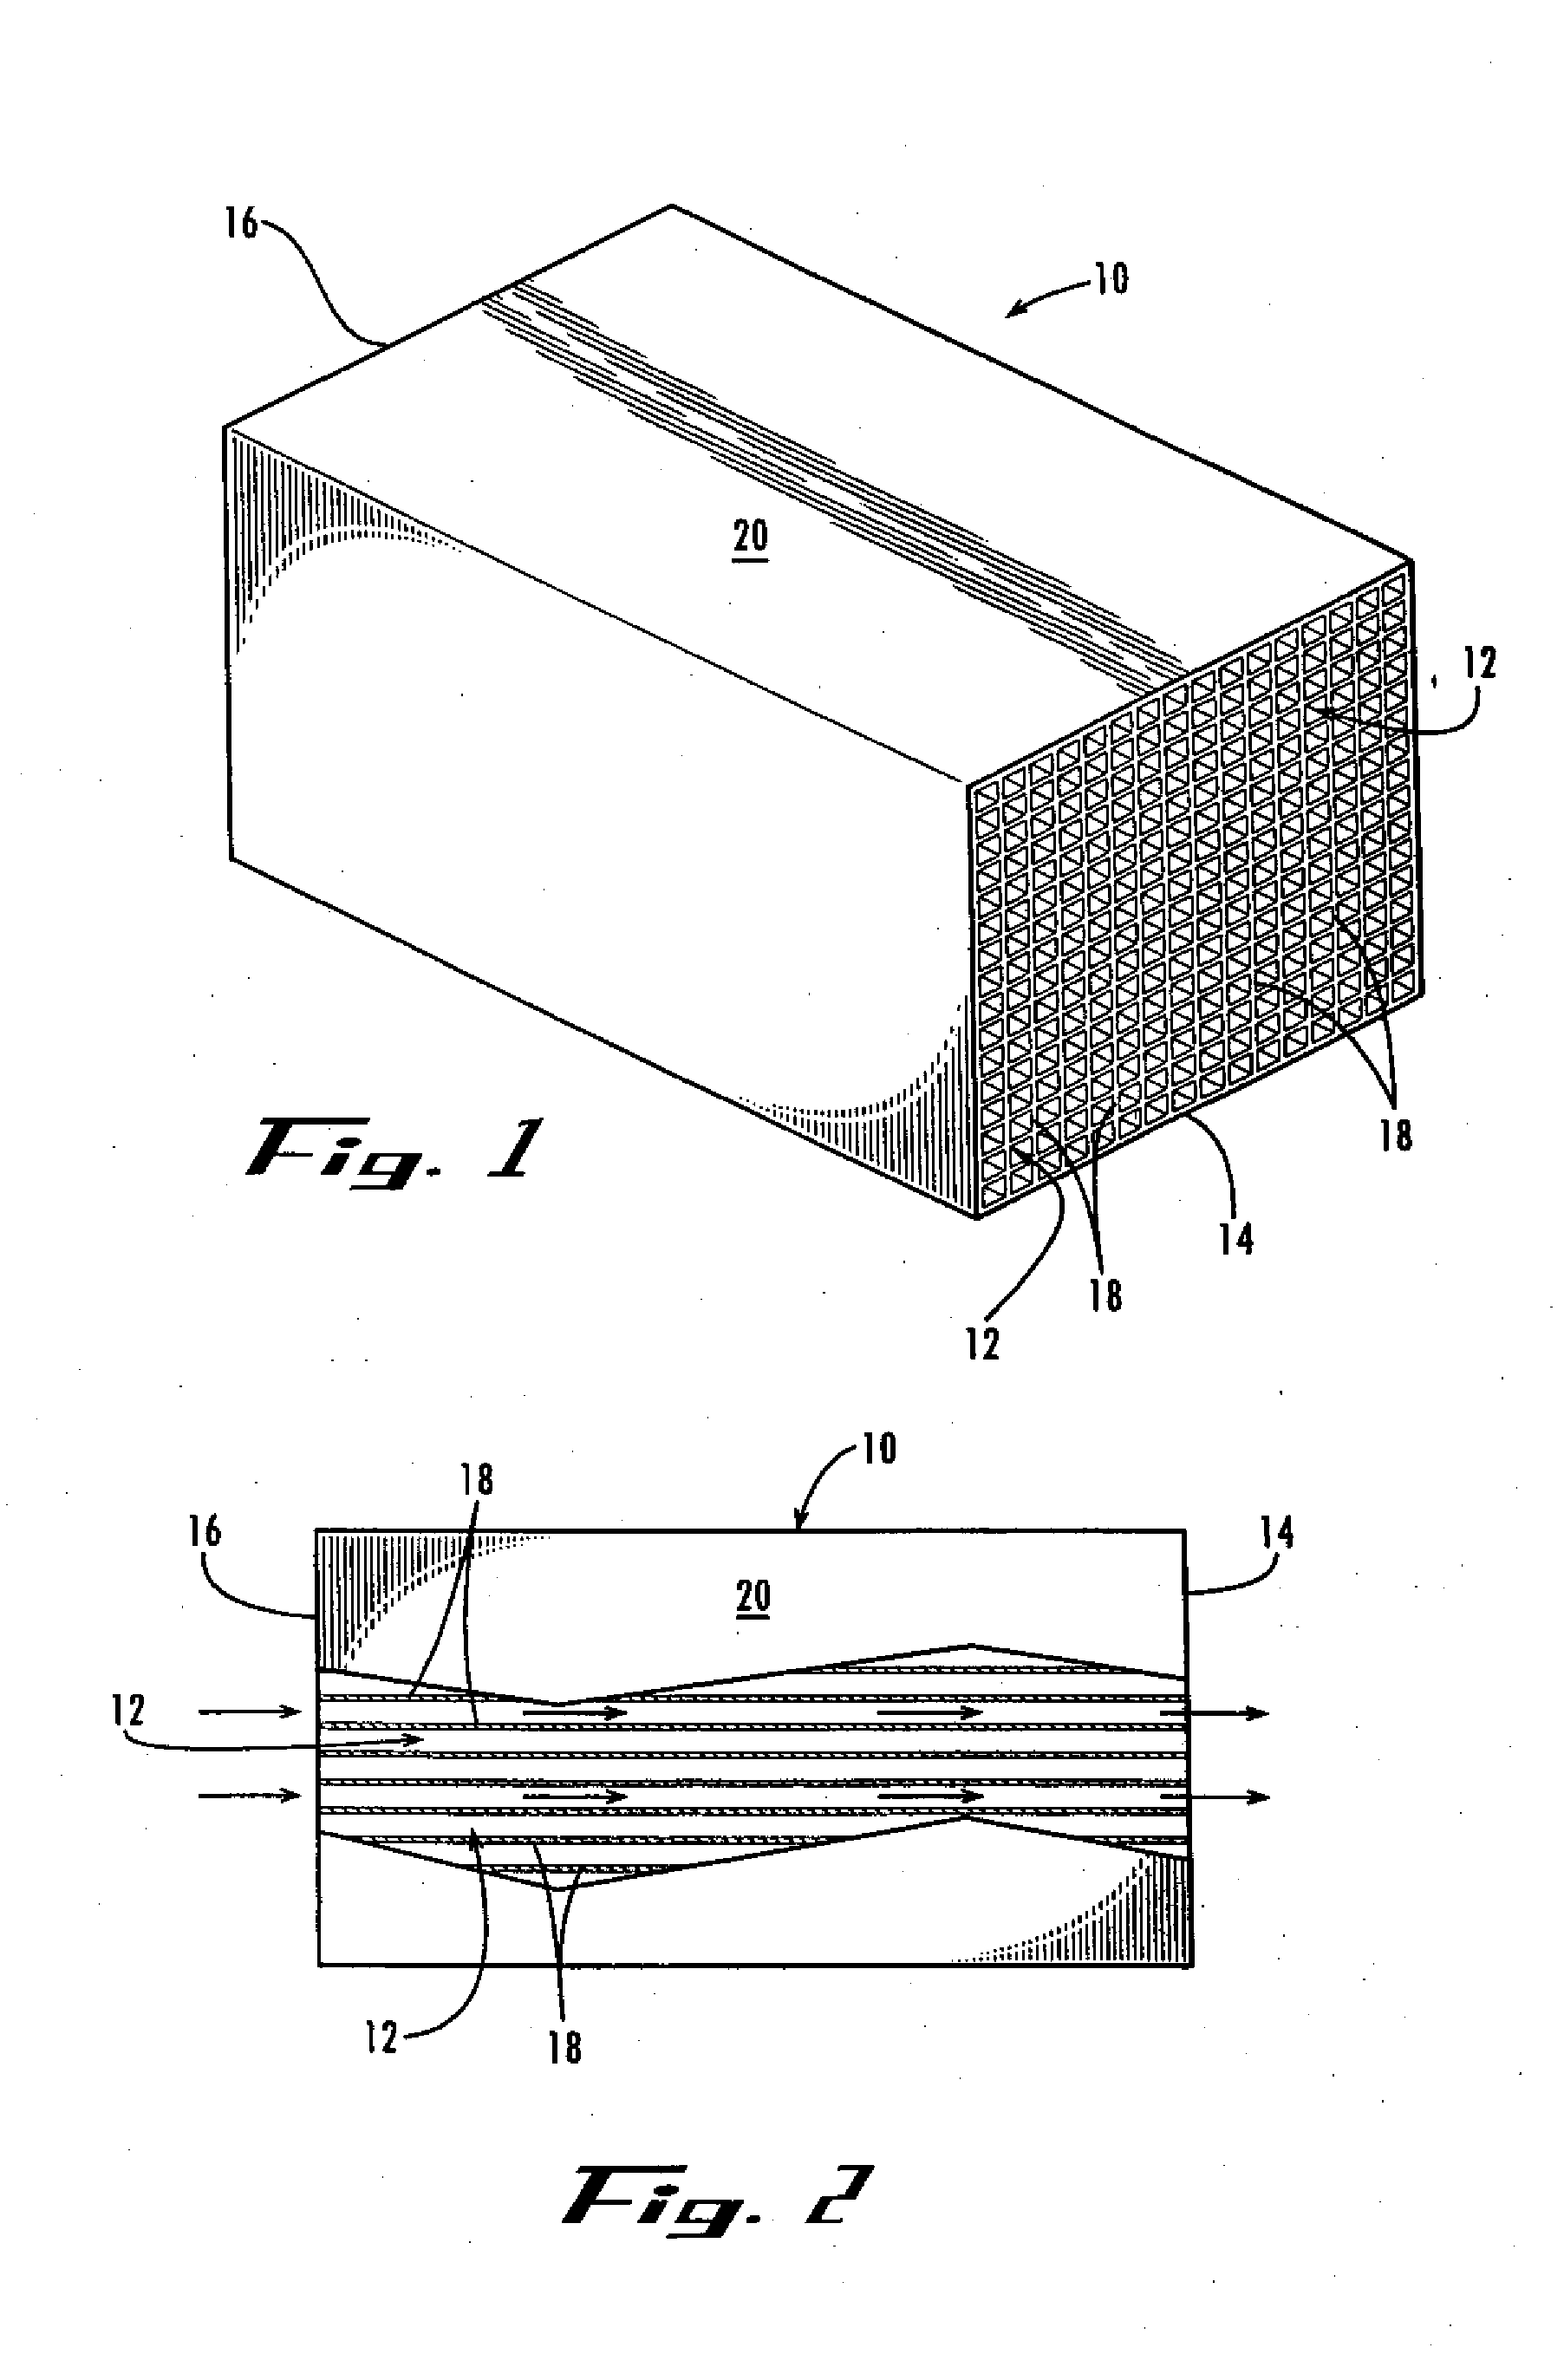 Carbon black monolith, carbon black monolith catalyst, methods for making same, and uses thereof